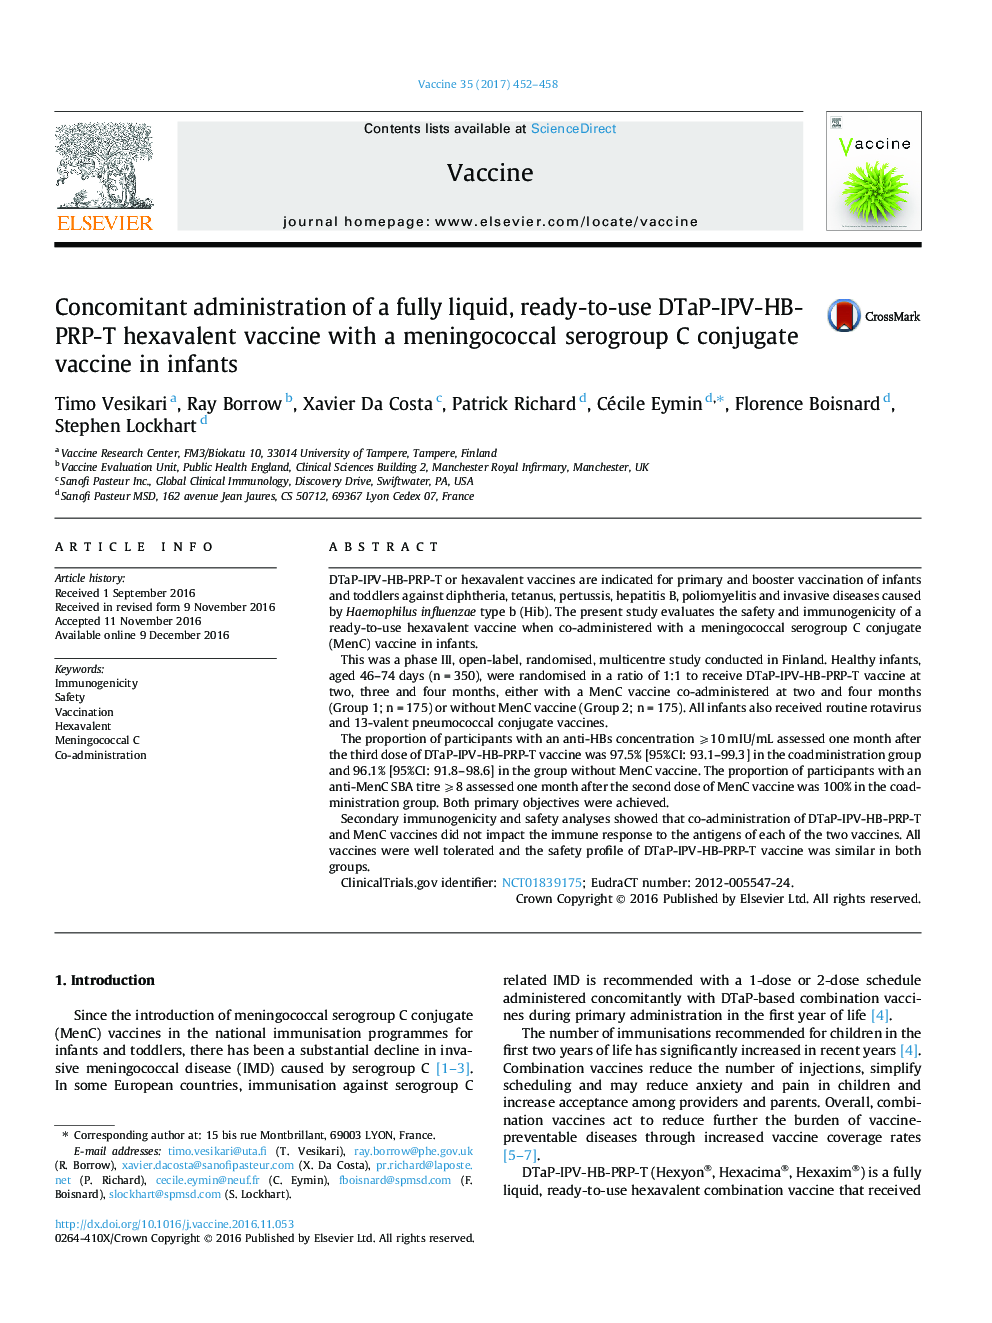 Concomitant administration of a fully liquid, ready-to-use DTaP-IPV-HB-PRP-T hexavalent vaccine with a meningococcal serogroup C conjugate vaccine in infants